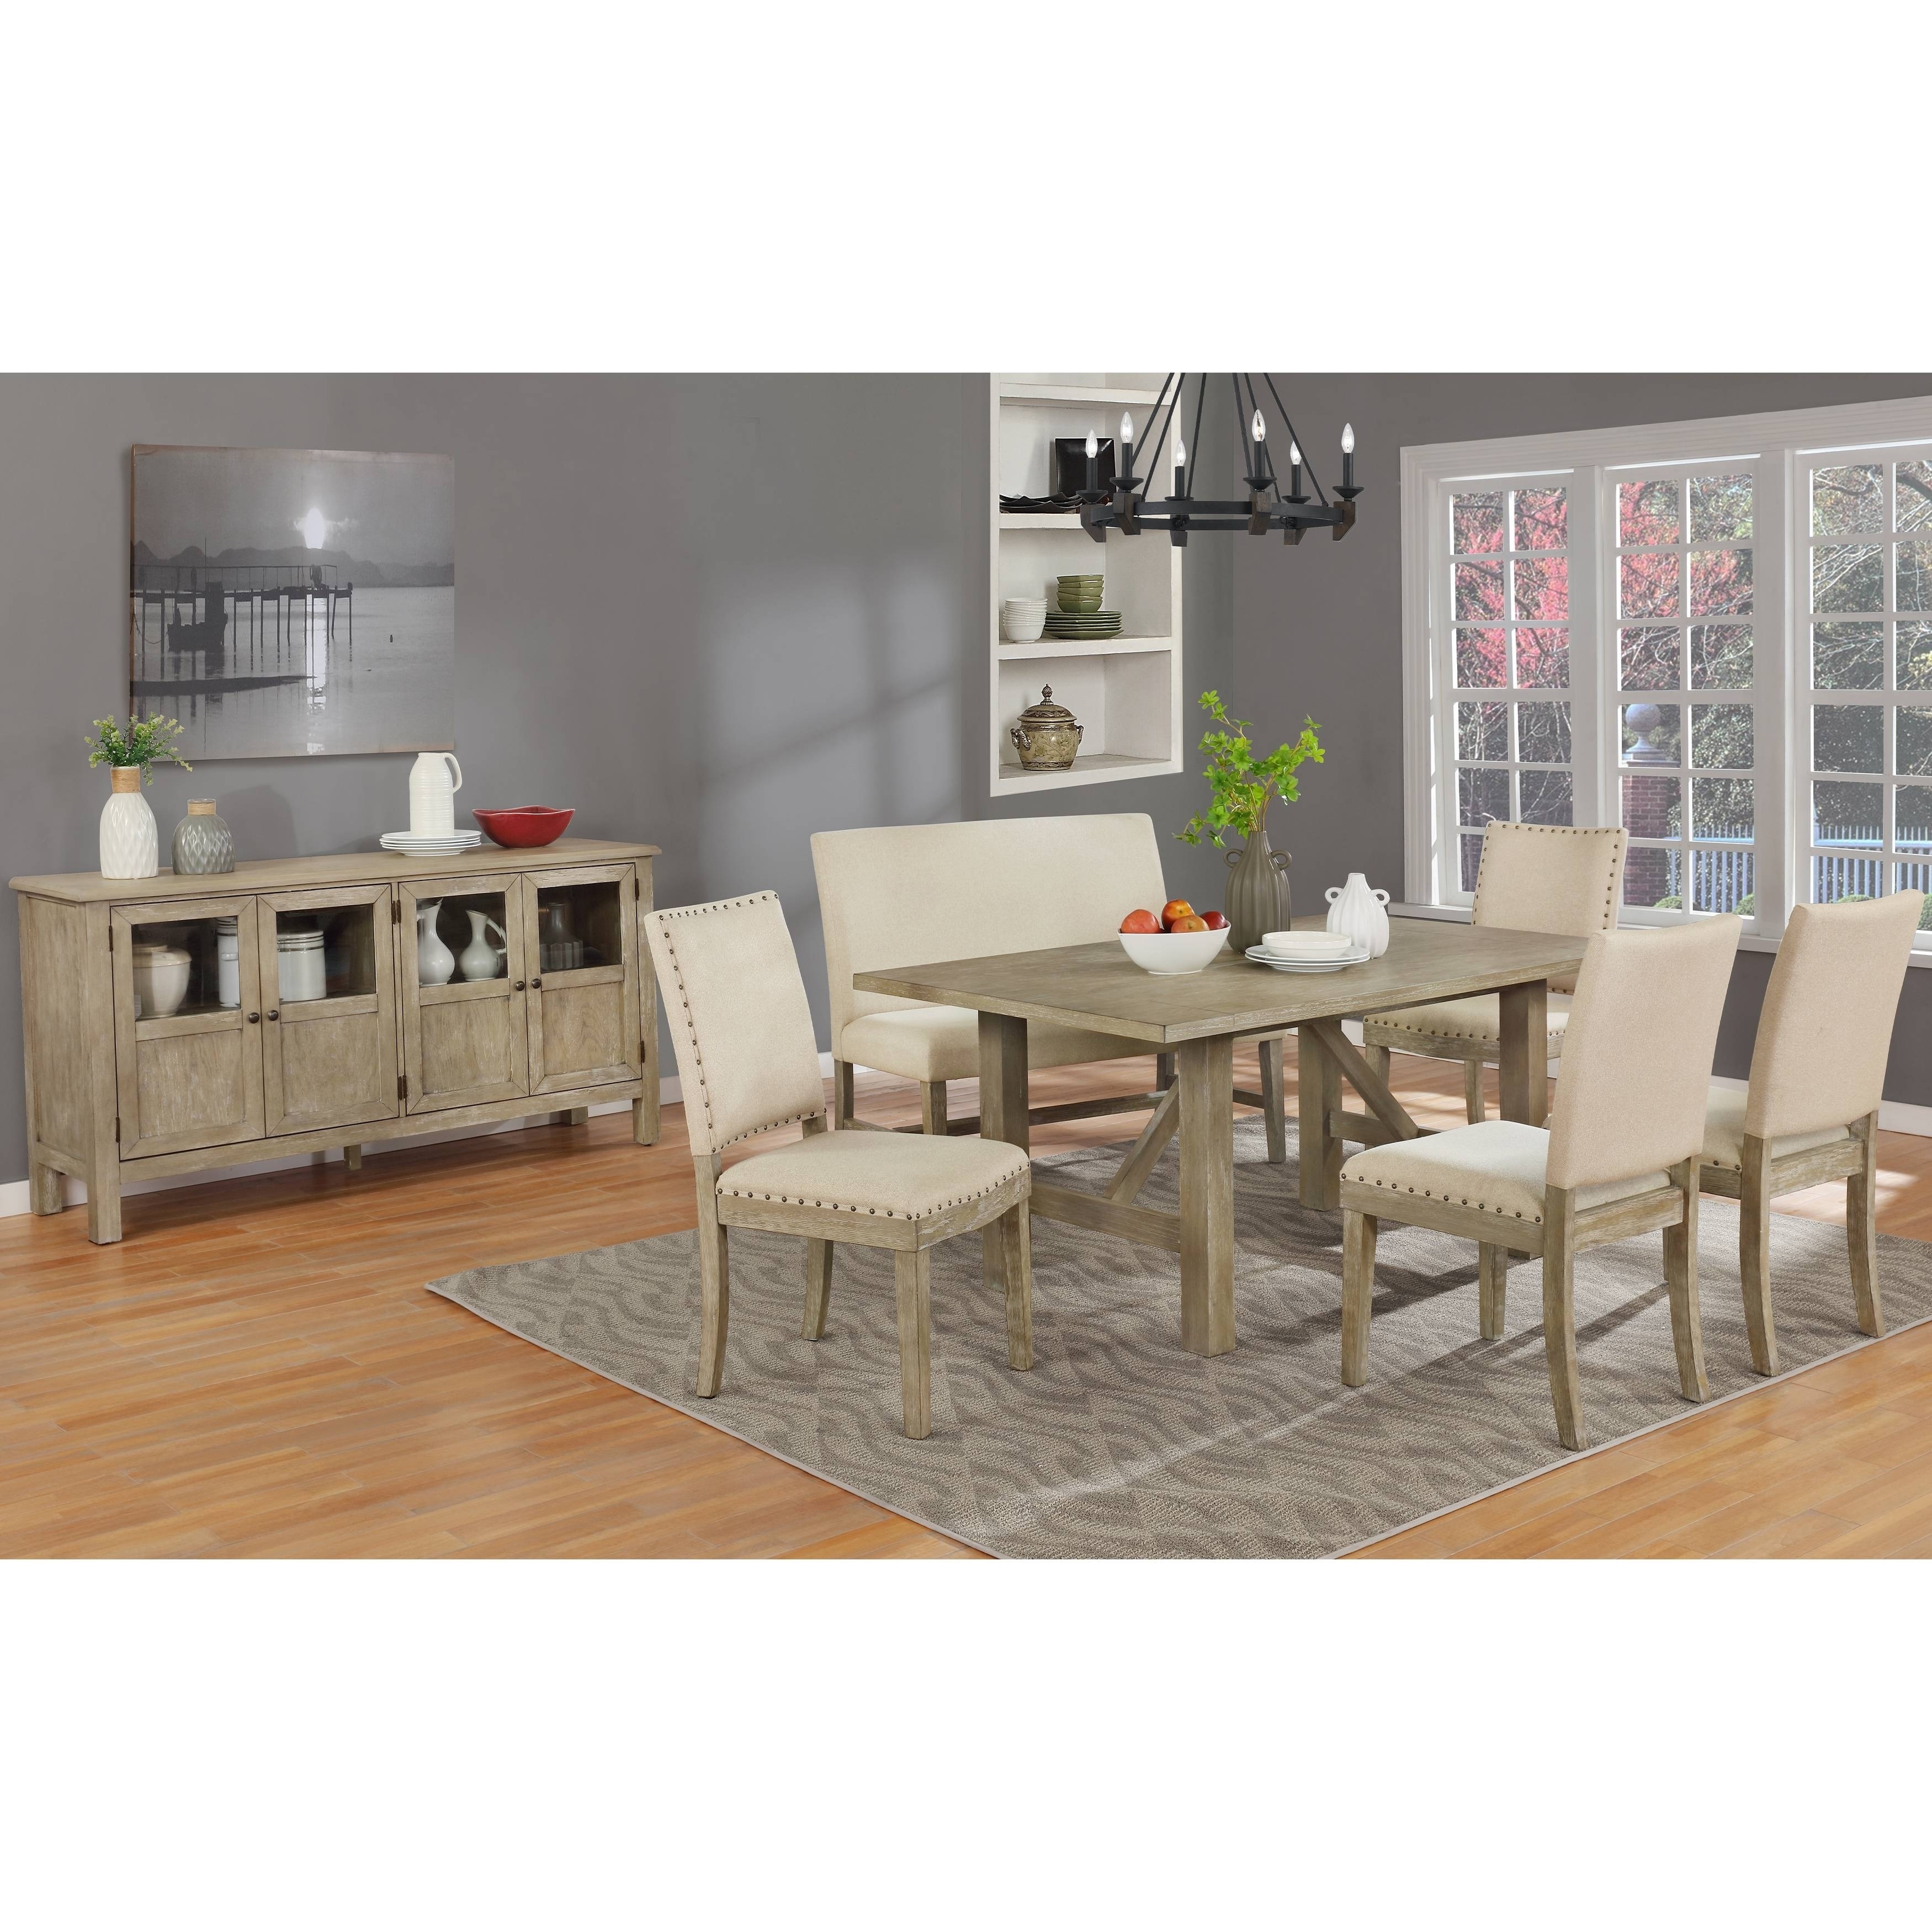 Best Quality Furniture Rustic Beige Dining Set With Upholstered Dining Chairs Bench And Server On Sale Overstock 30933165